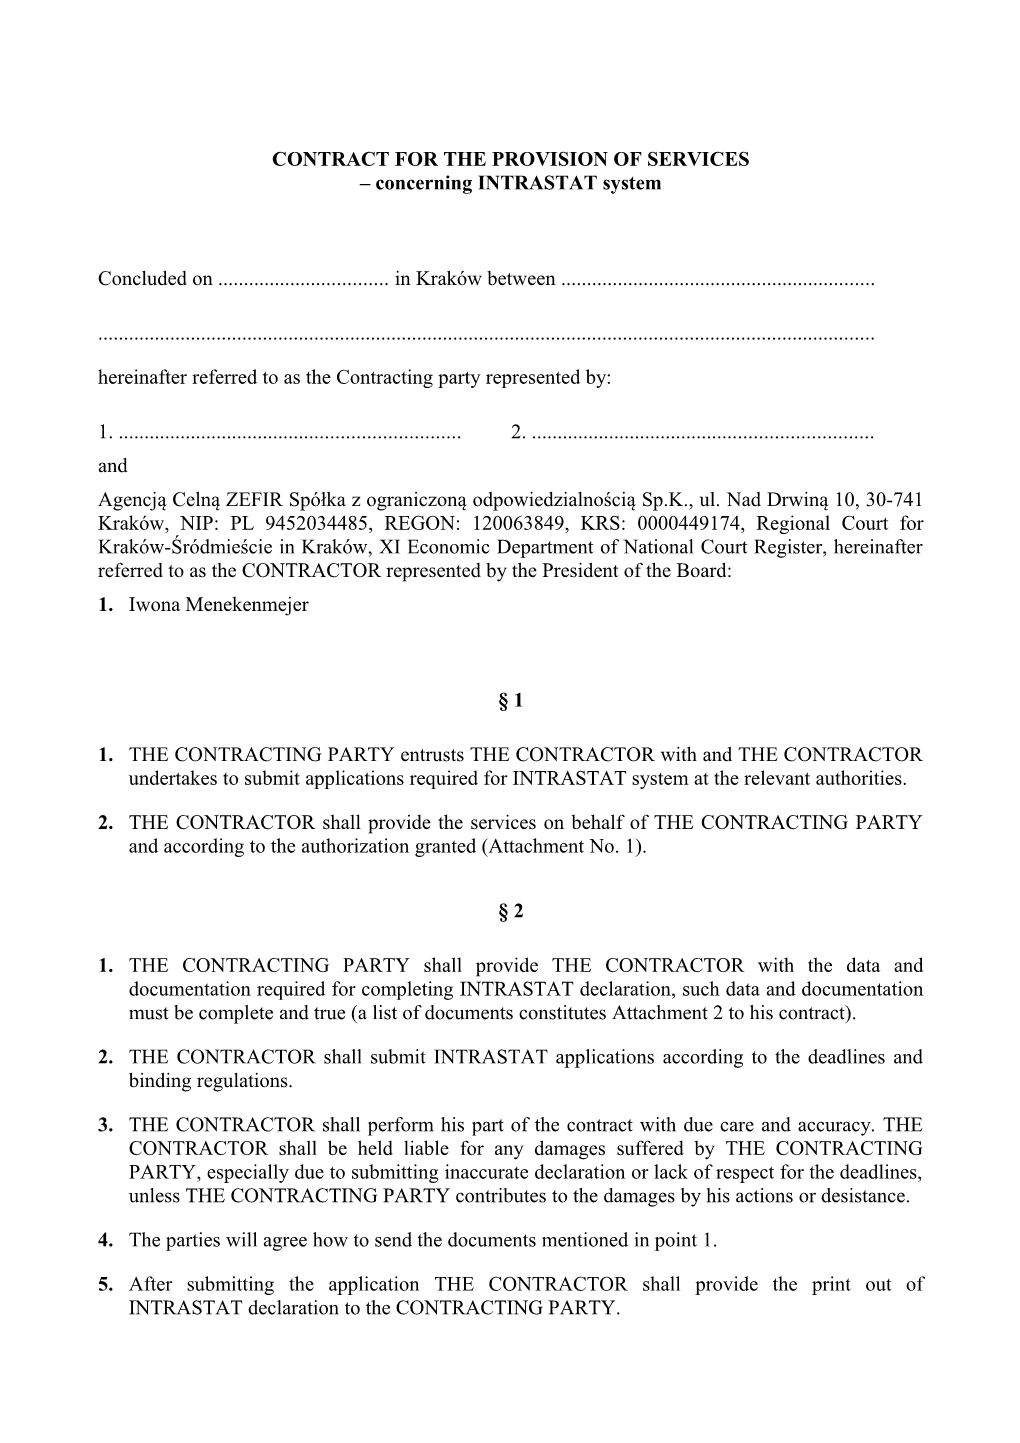 CONTRACT for the PROVISION of SERVICES Concerning INTRASTAT System